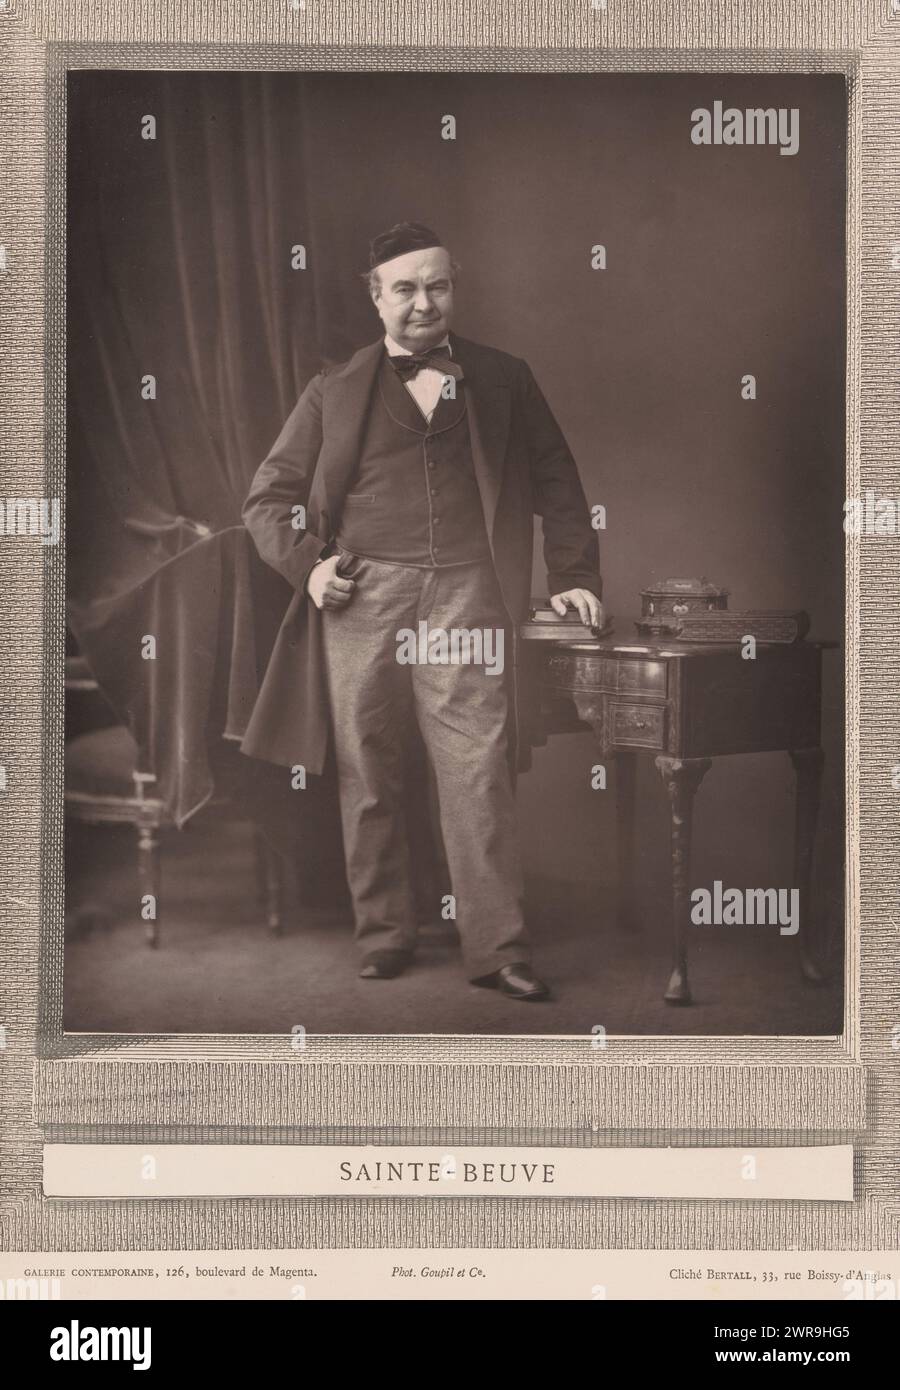 Portrait of Charles Augustin Sainte-Beuve, Sainte-Beuve (title on object), Bertall, Goupil & Cie., c. 1866 - in or before 1877, paper, height 235 mm × width 191 mm, photomechanical print Stock Photo